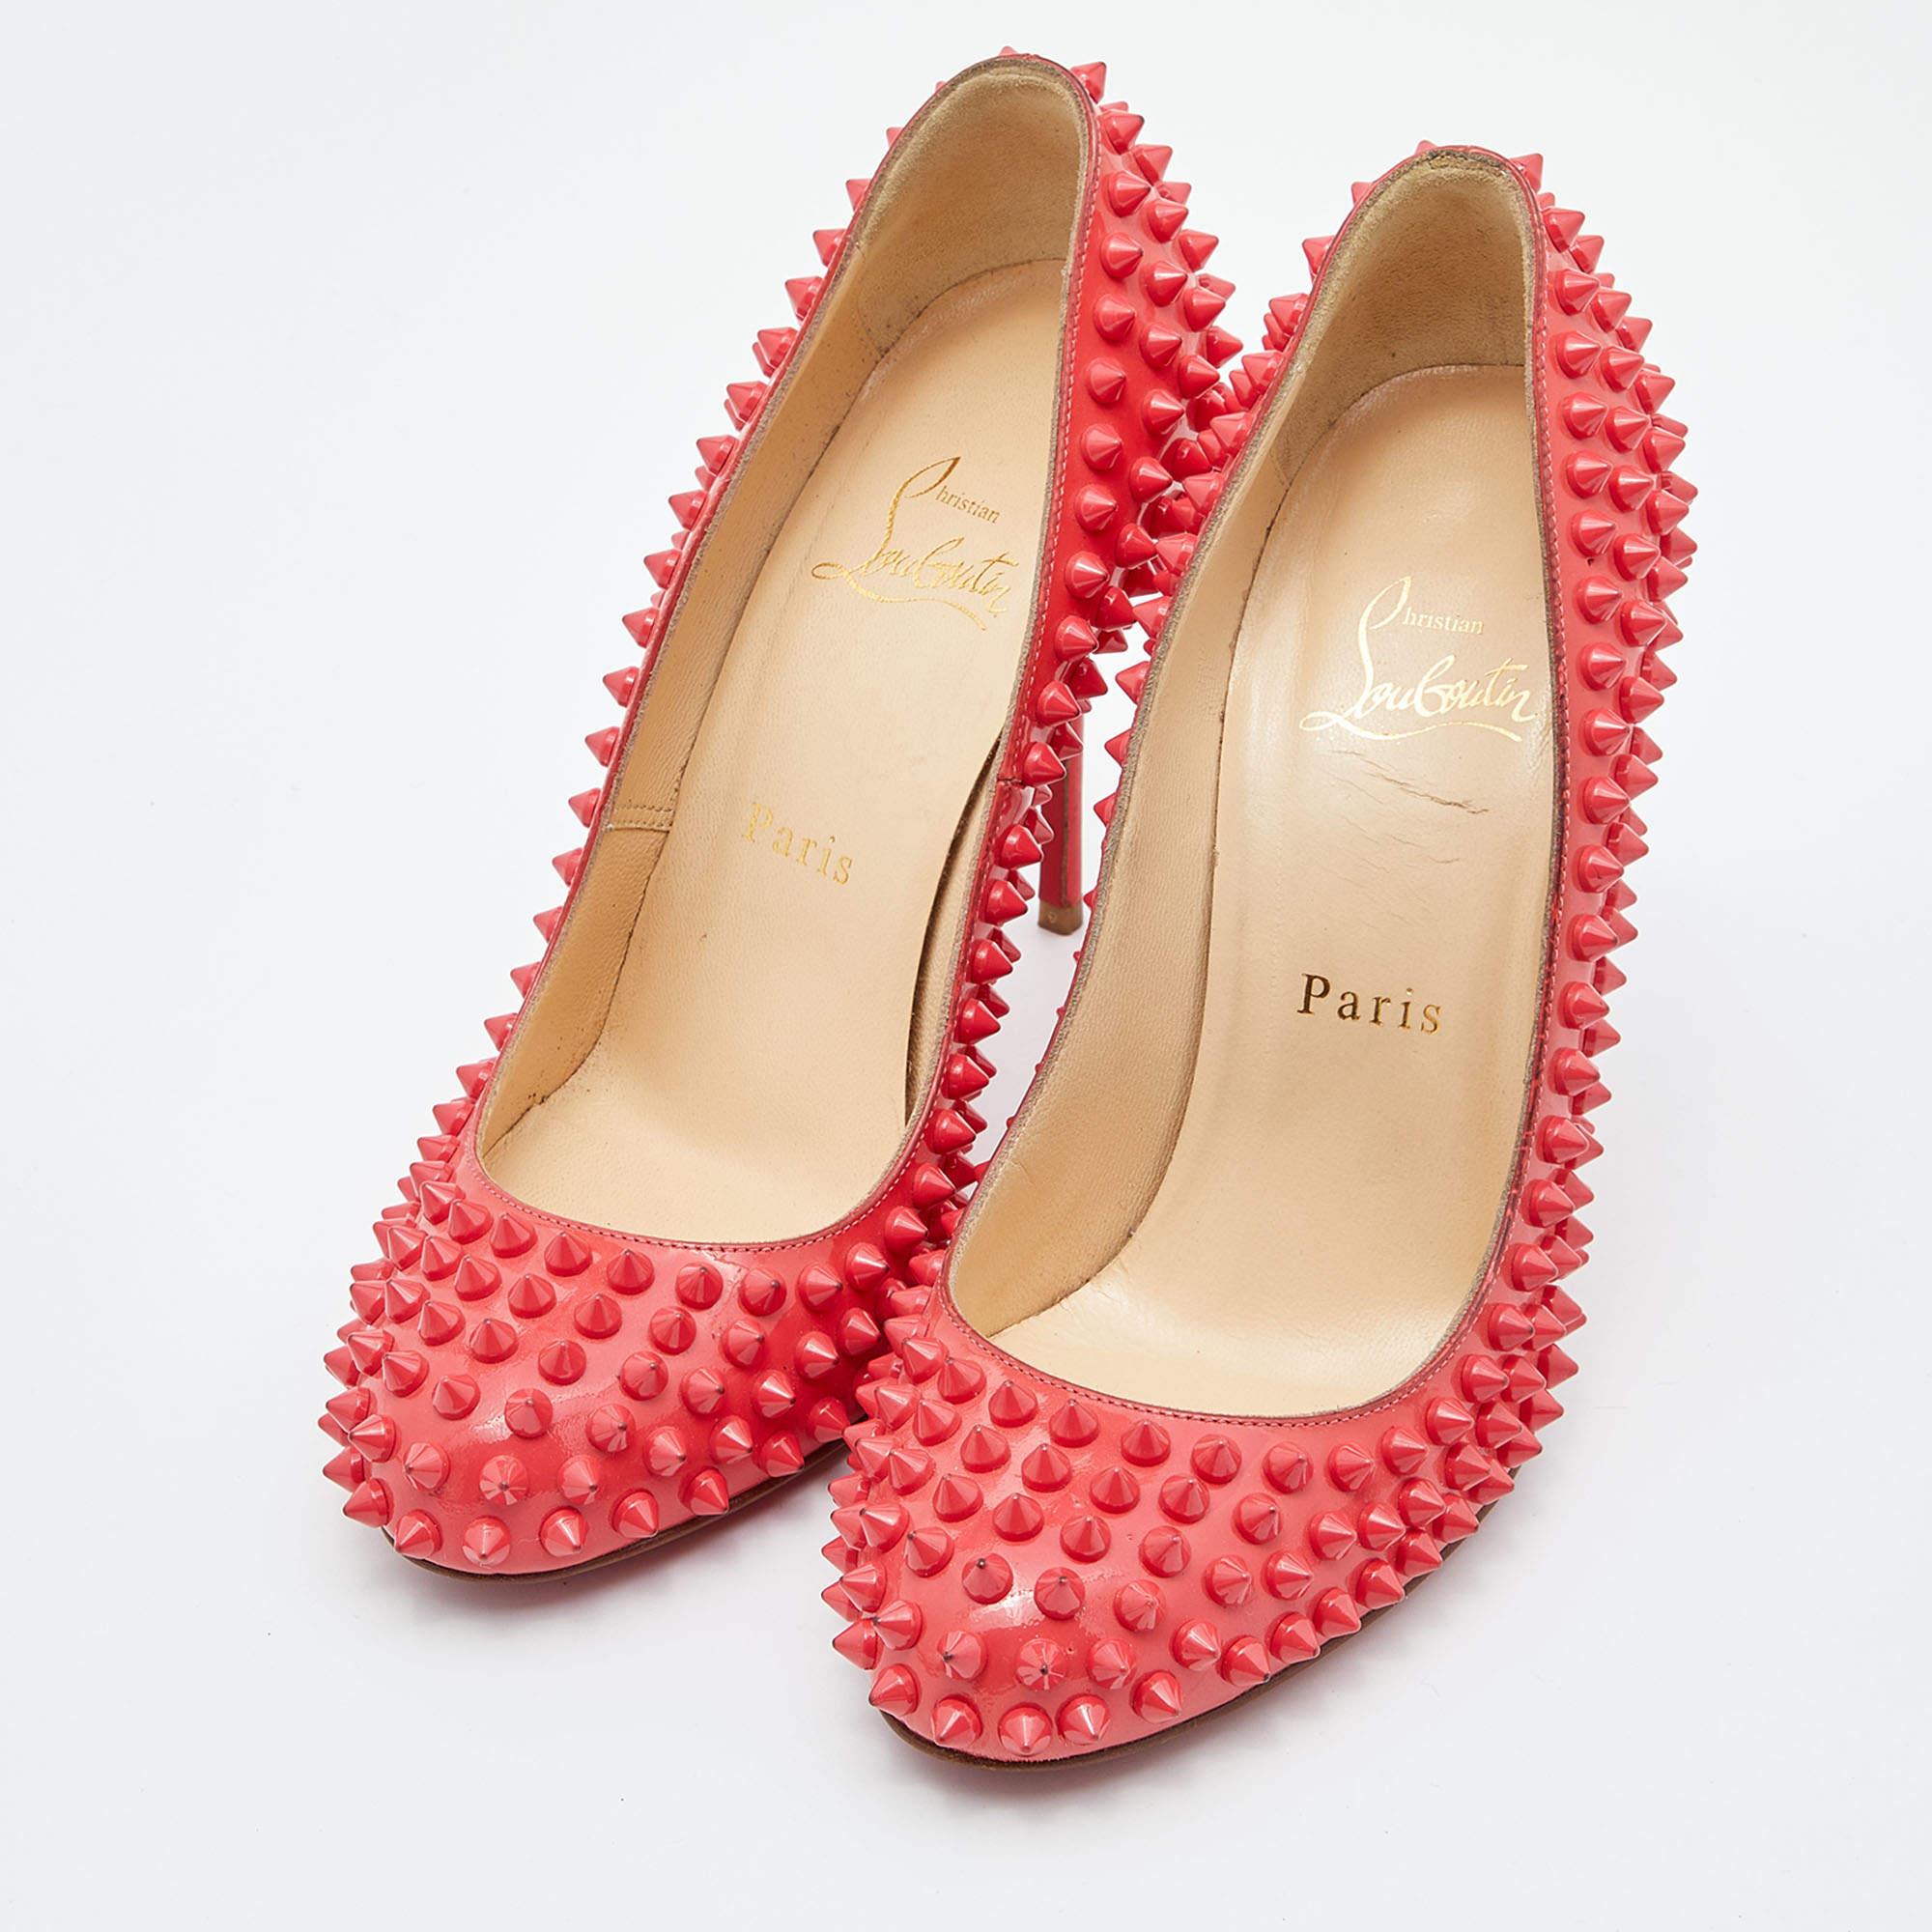 Christian Louboutin Coral Pink Patent Leather Fifi Spikes Pumps Size 36.5 In Good Condition For Sale In Dubai, Al Qouz 2